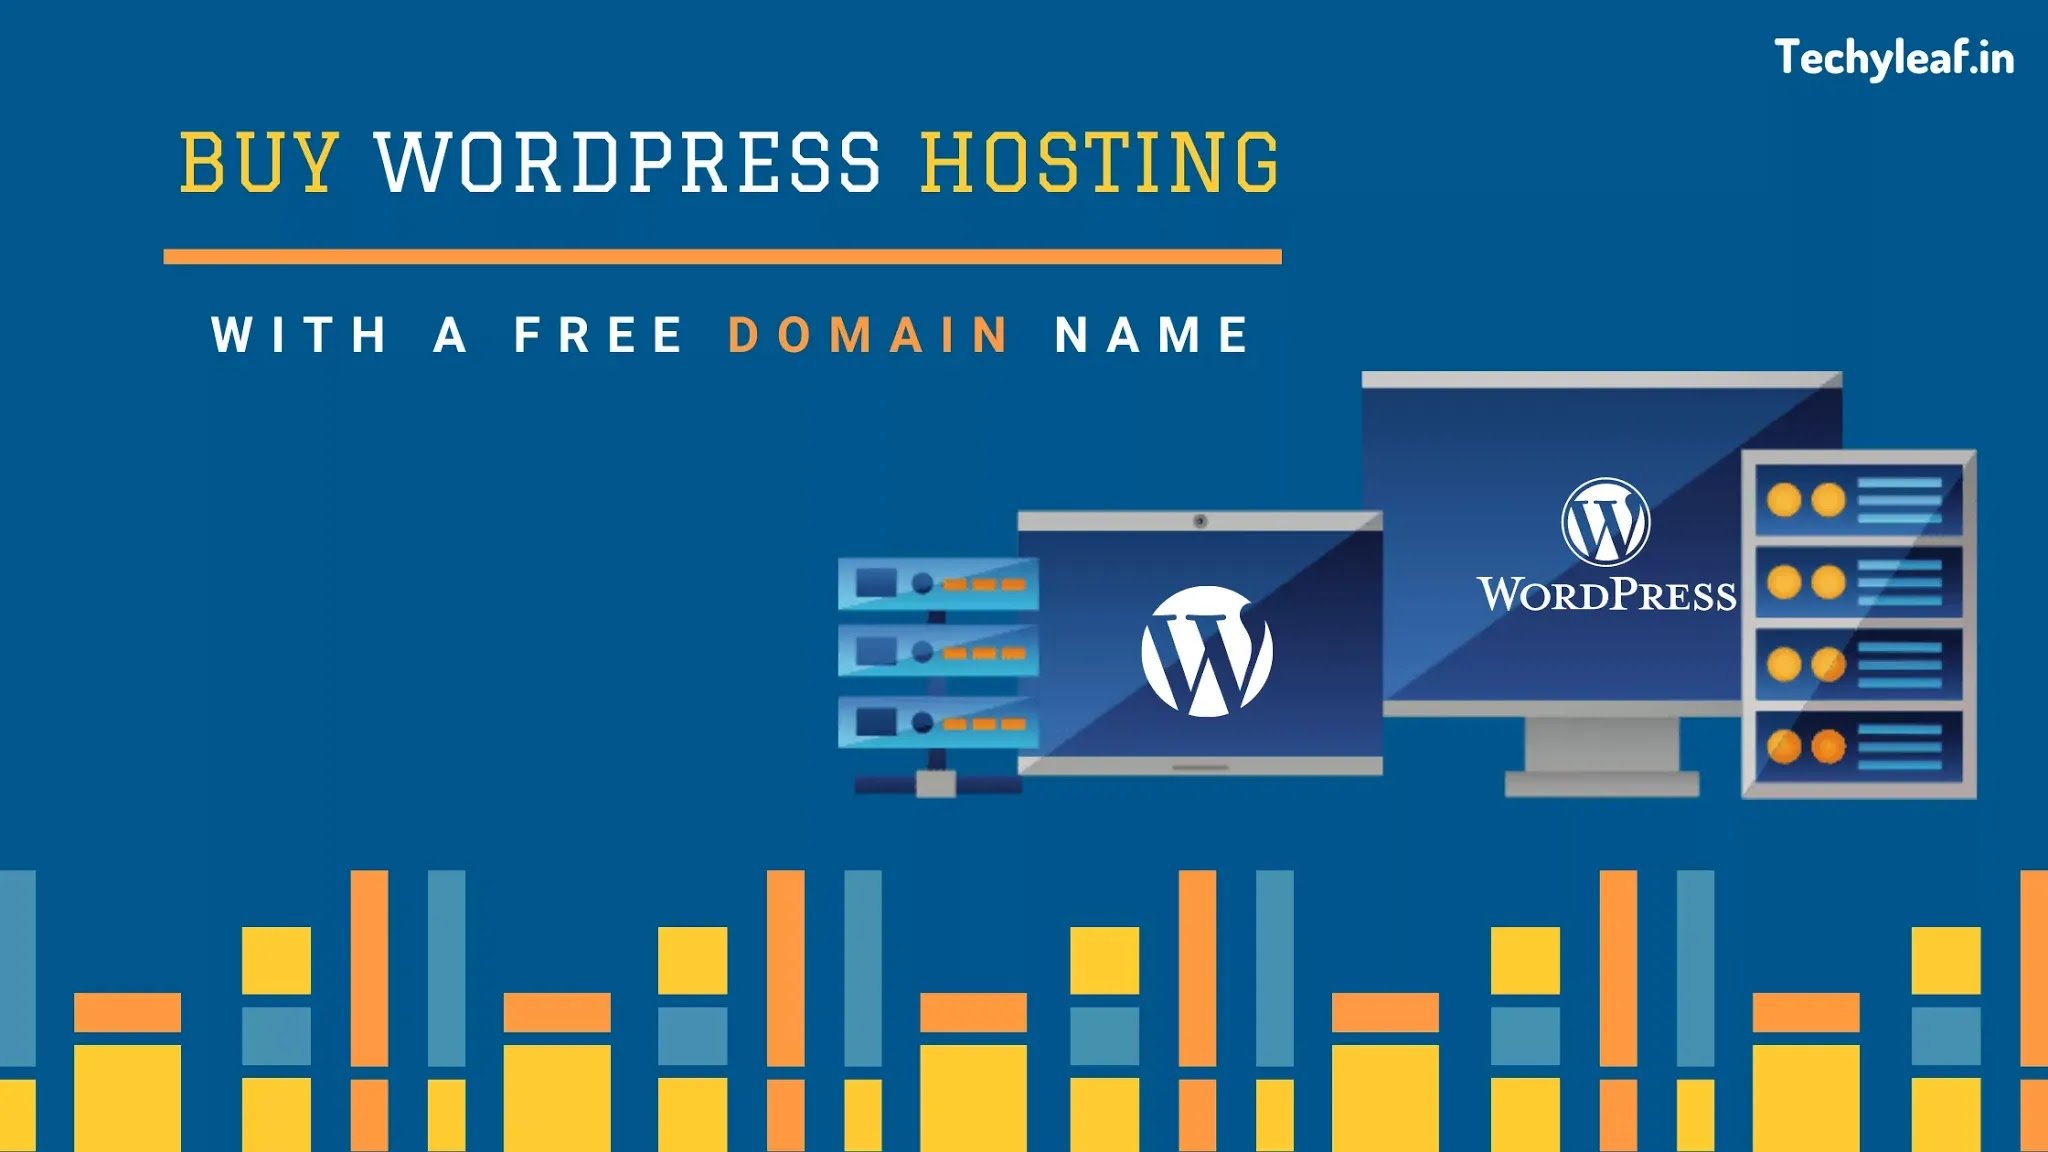 How to buy a wordpress hosting with a free domain name in 2020.